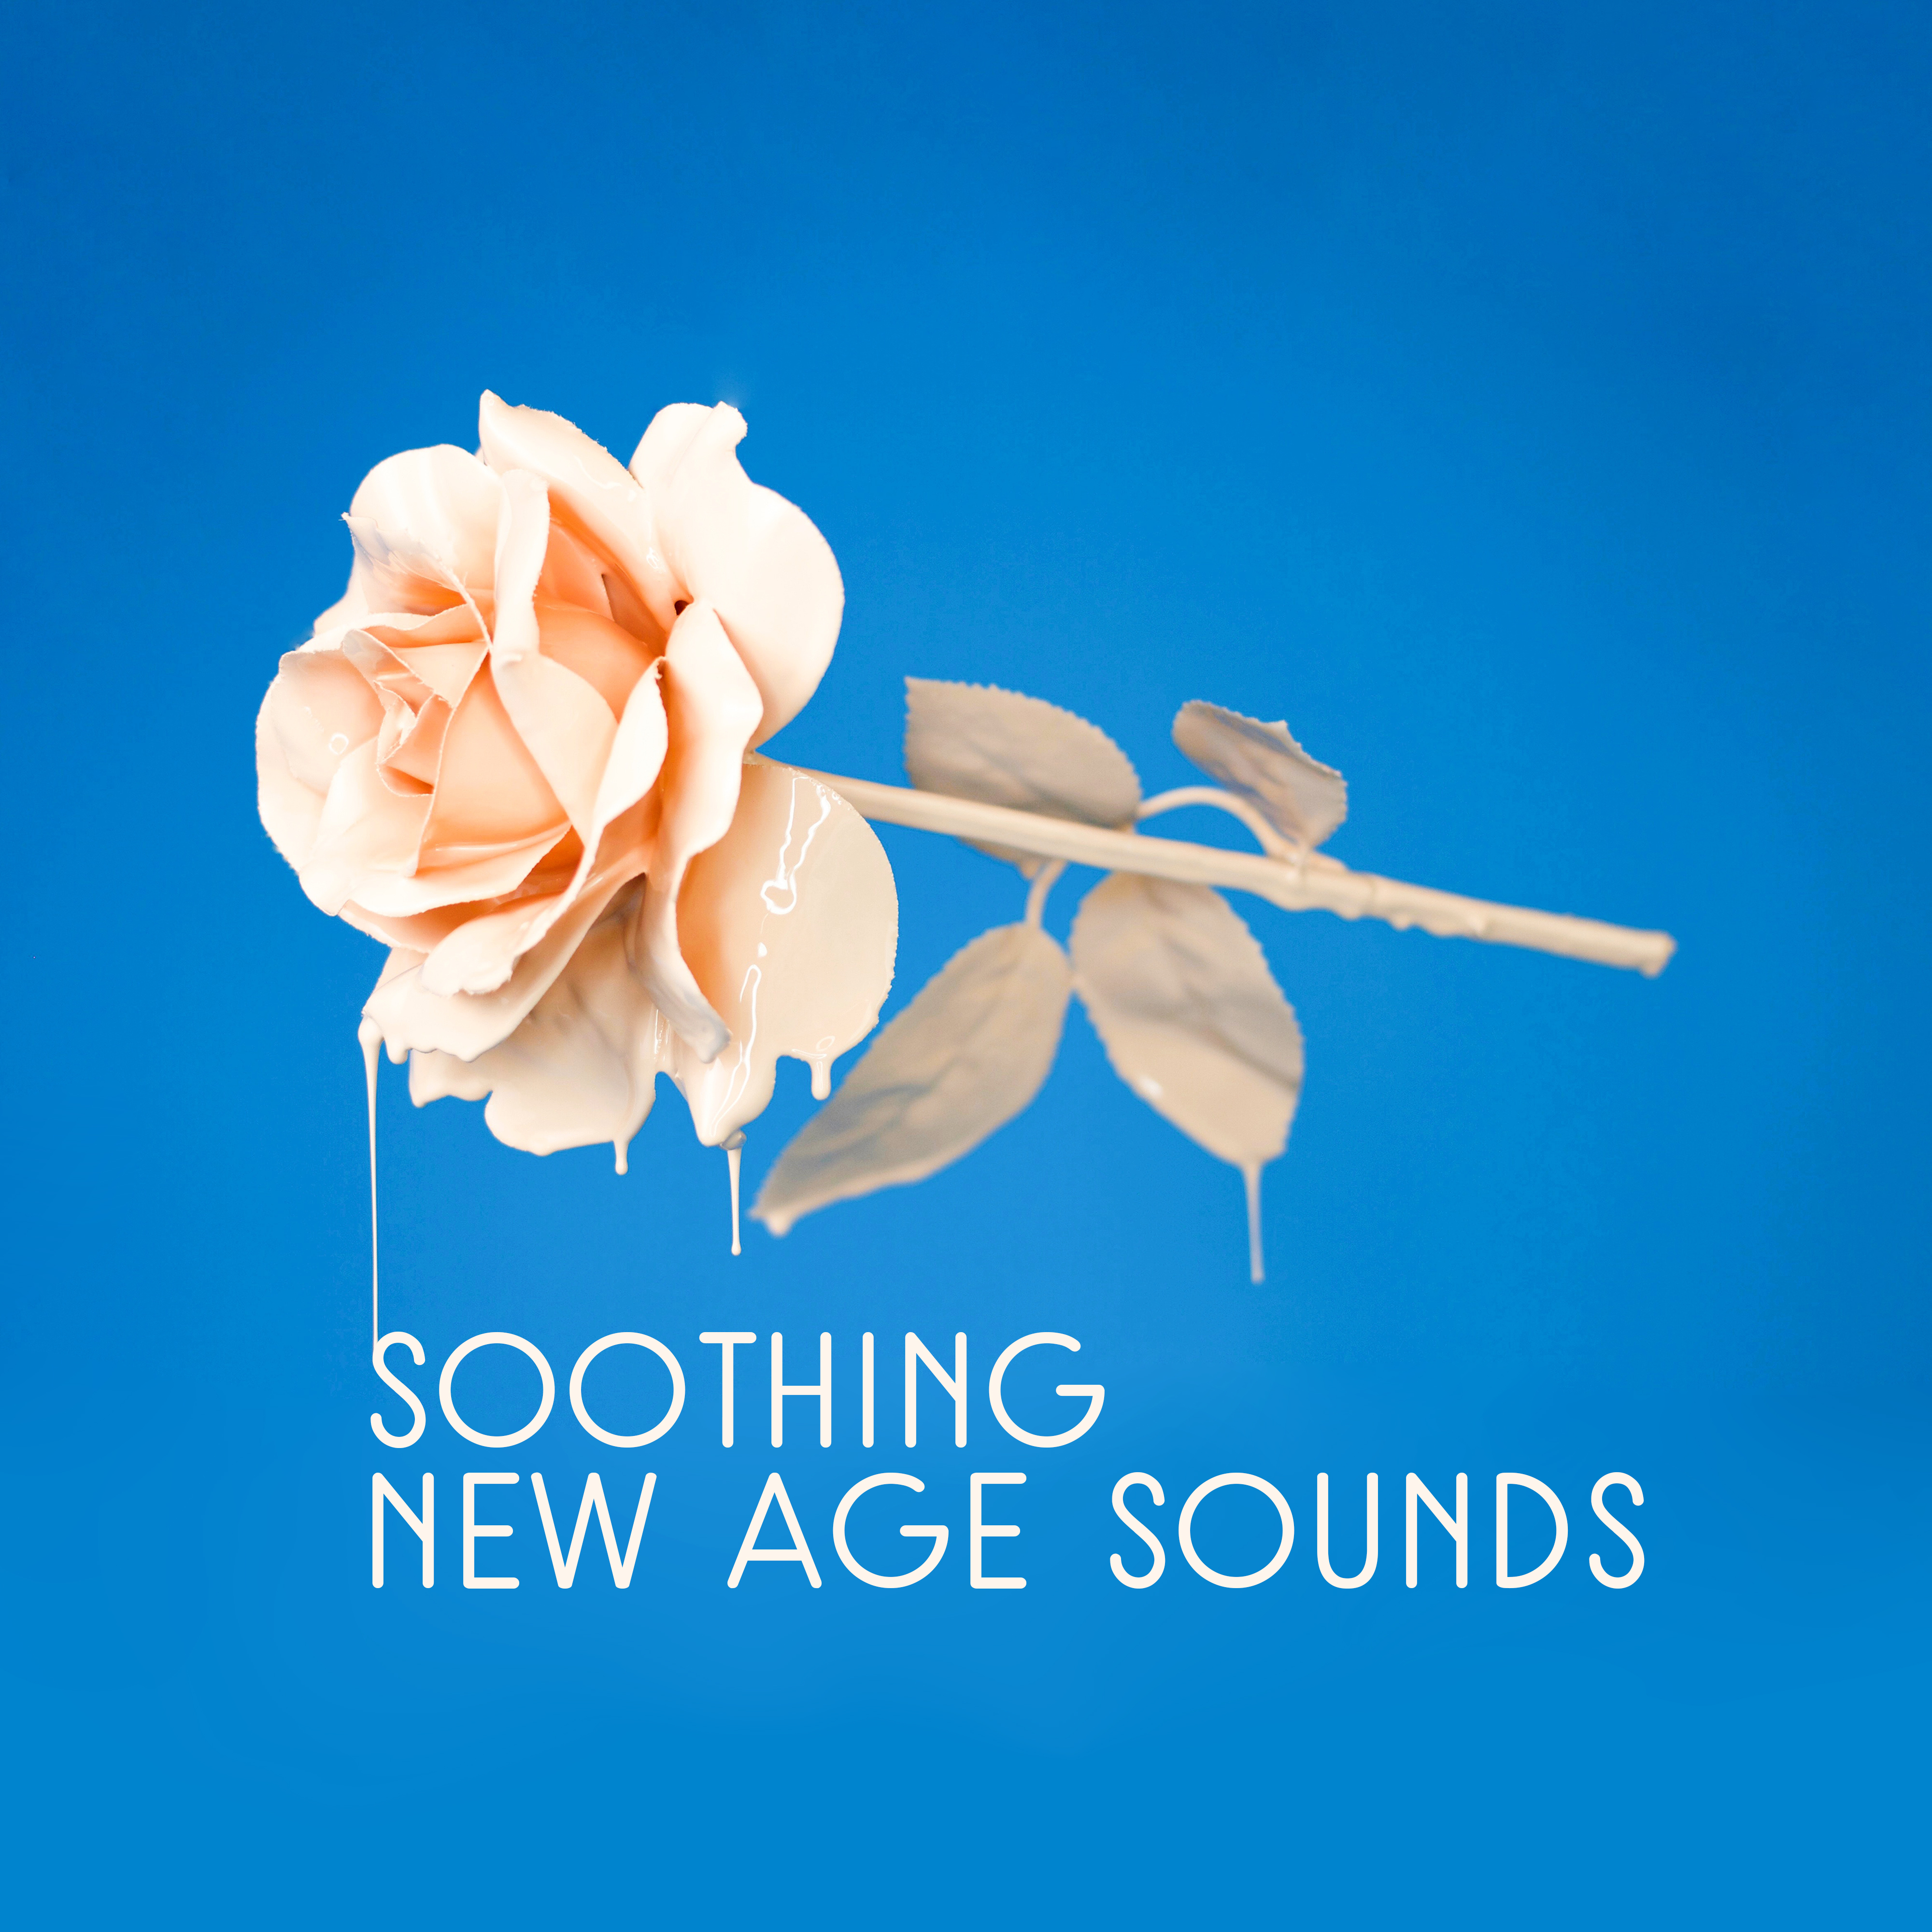 Soothing New Age Sounds